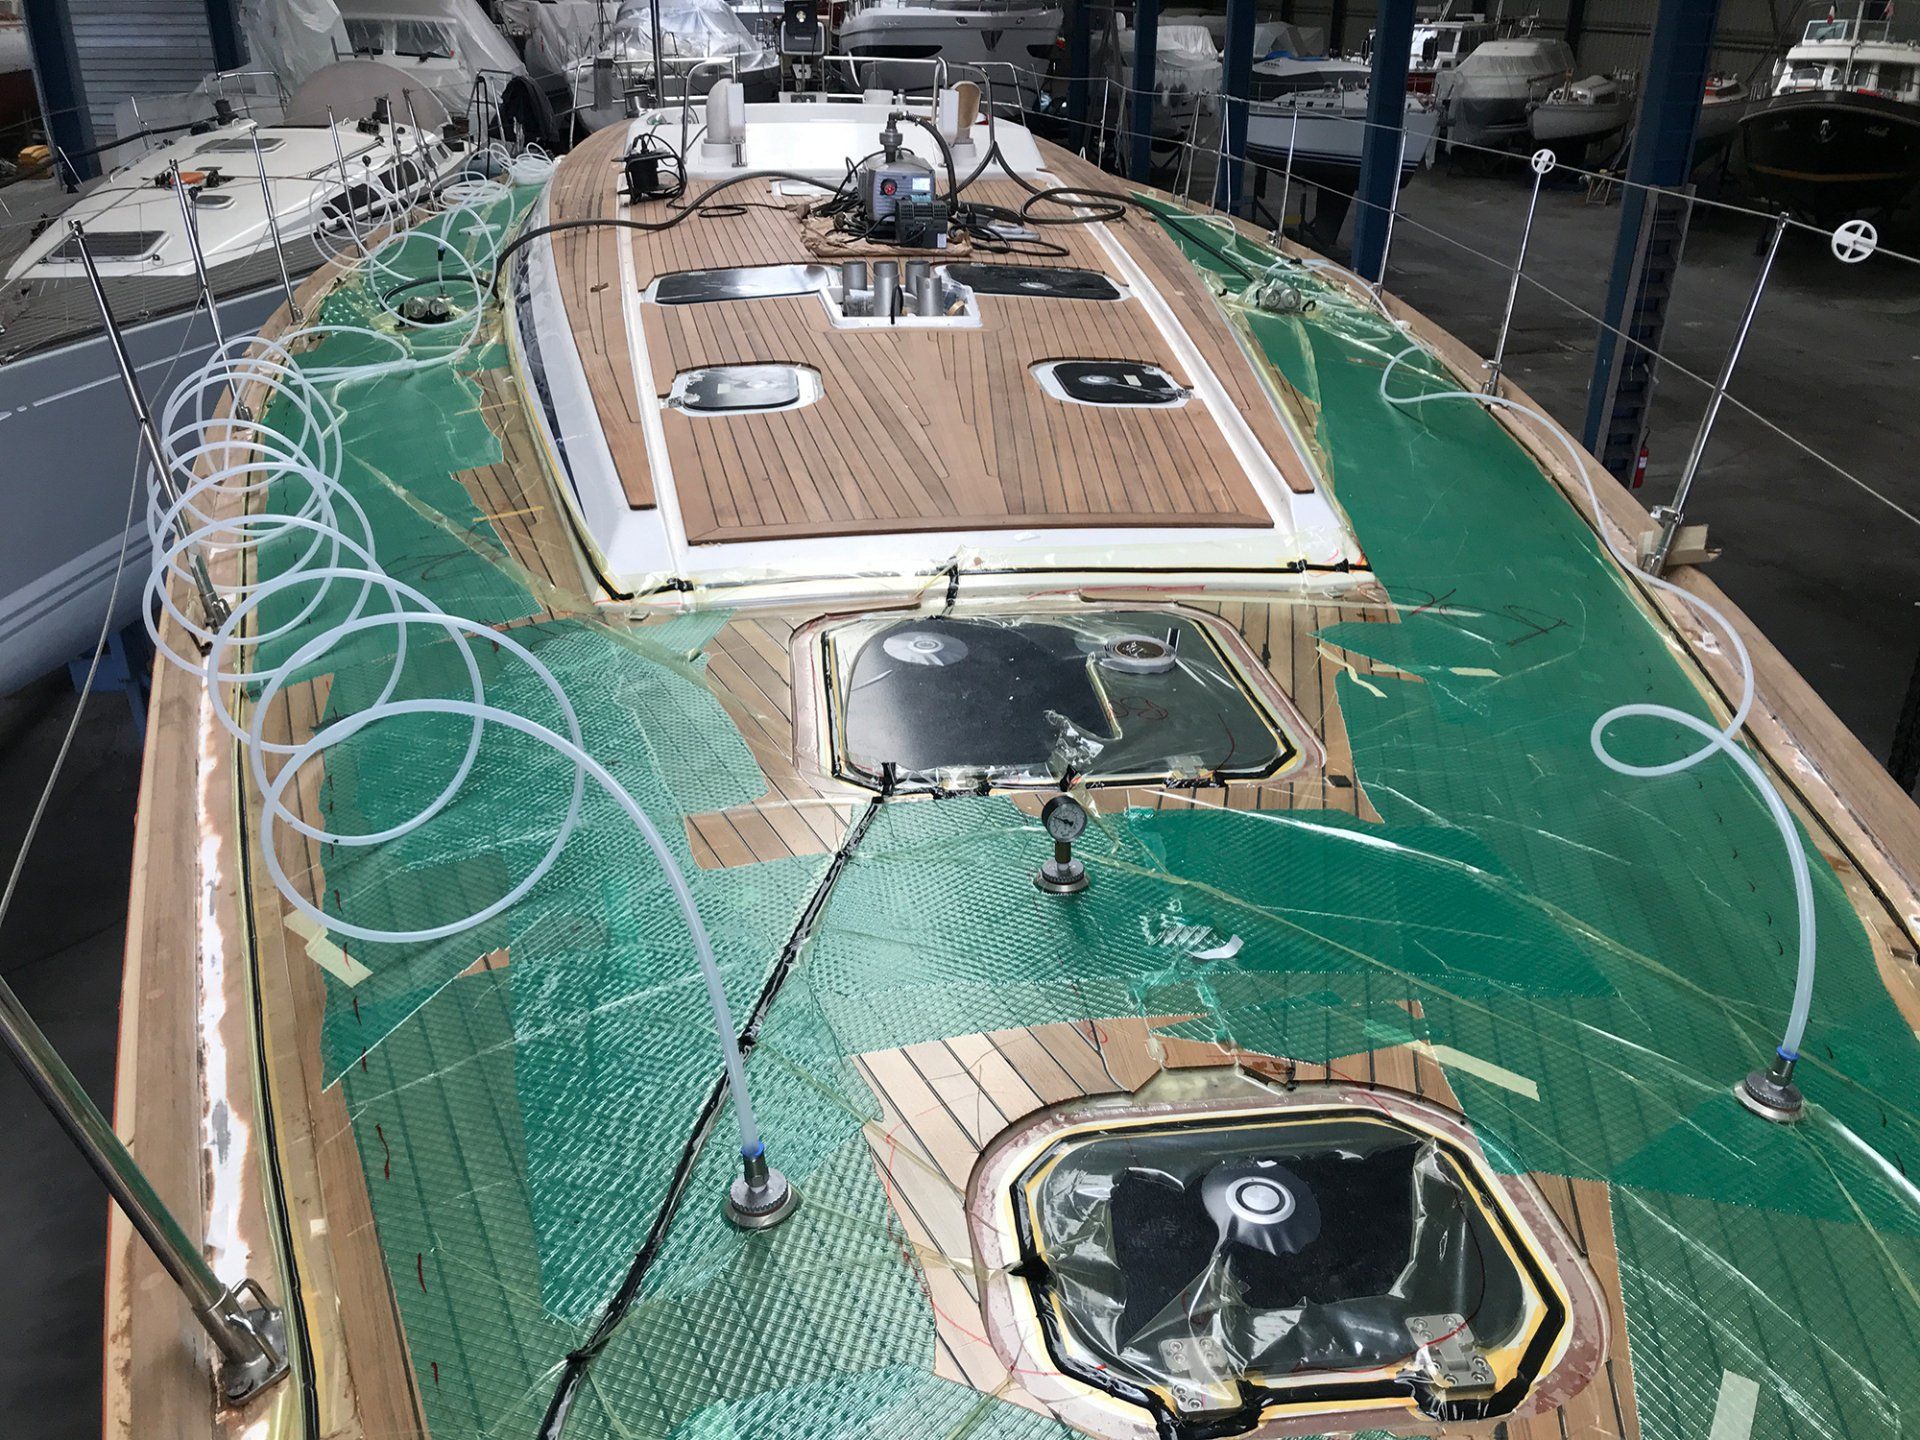 The new teak deck or boat deck made of wood alternatives is joined to the hull by vacuum bonding